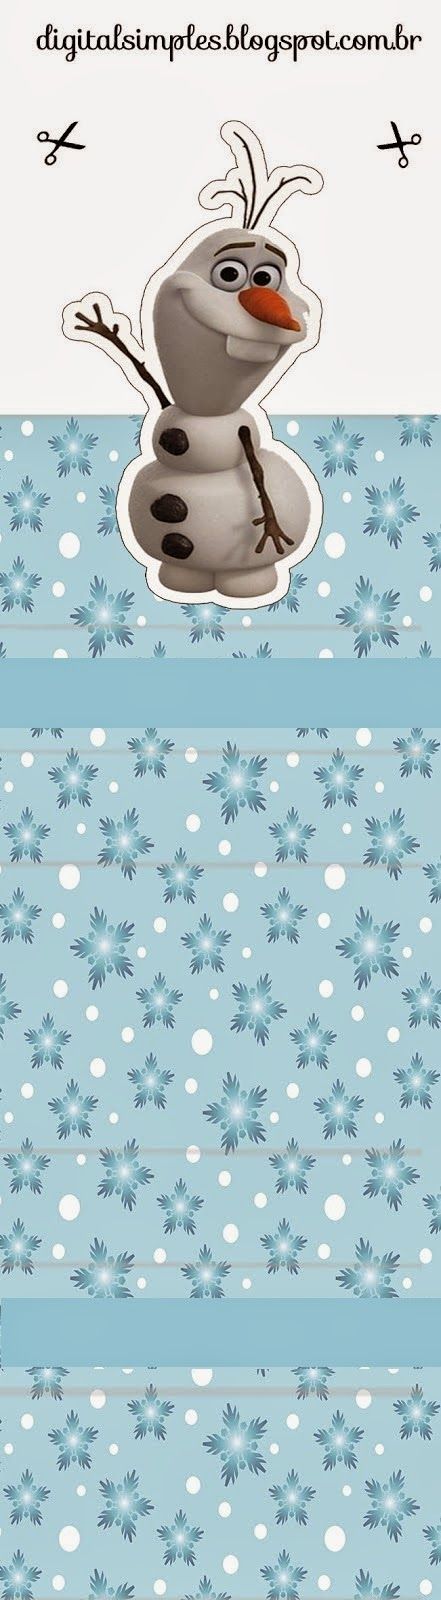 Frozen: Free Printable Original Nuggets or Gum Wrappers. Wallpaper